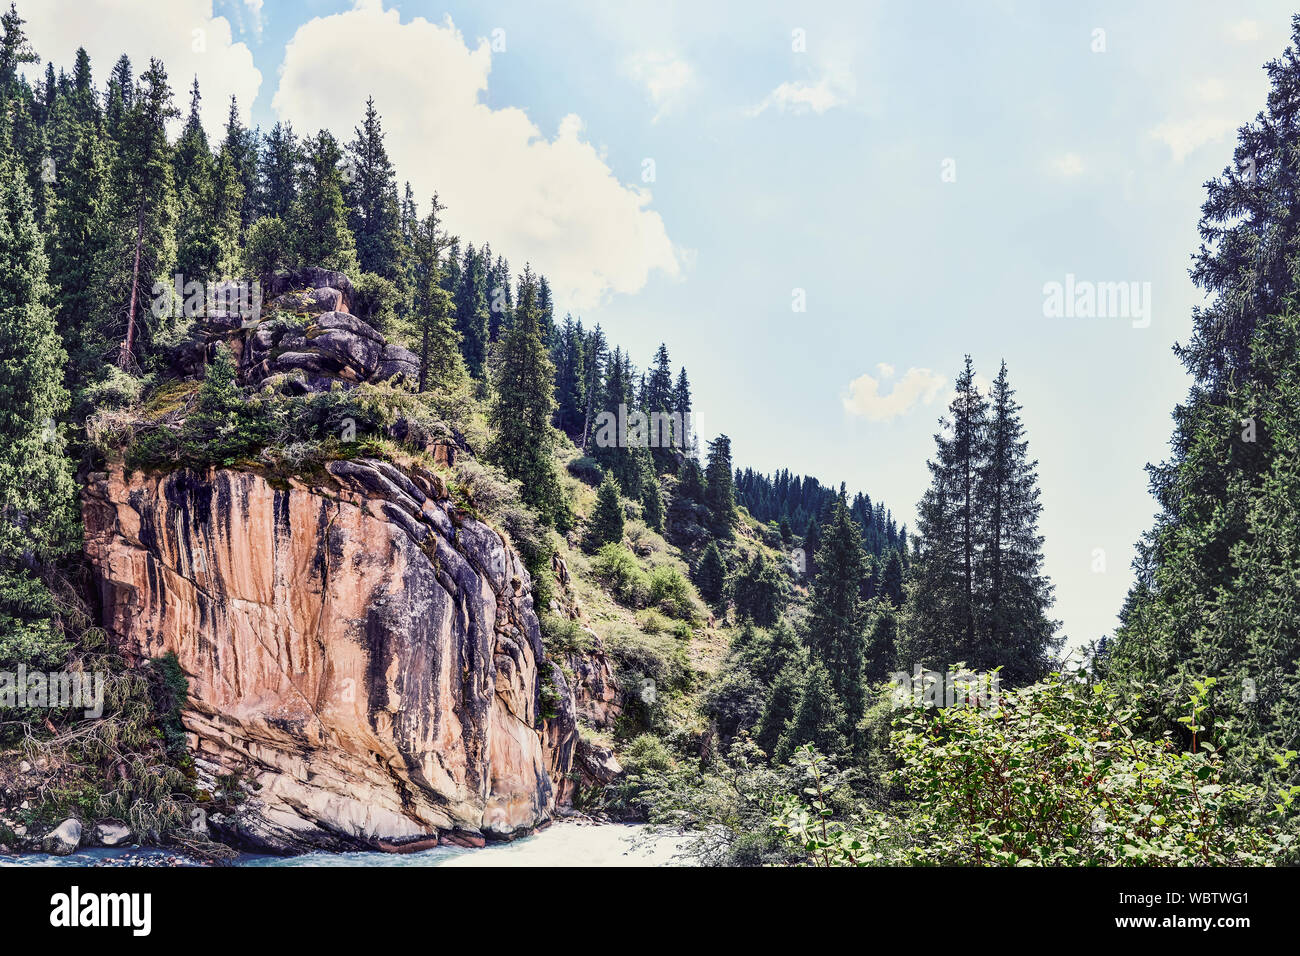 Mountain valley in the summer. A fabulous view of the mountain peaks, amazing nature. Mountain forest road. Green mountains with tall fir trees. The r Stock Photo